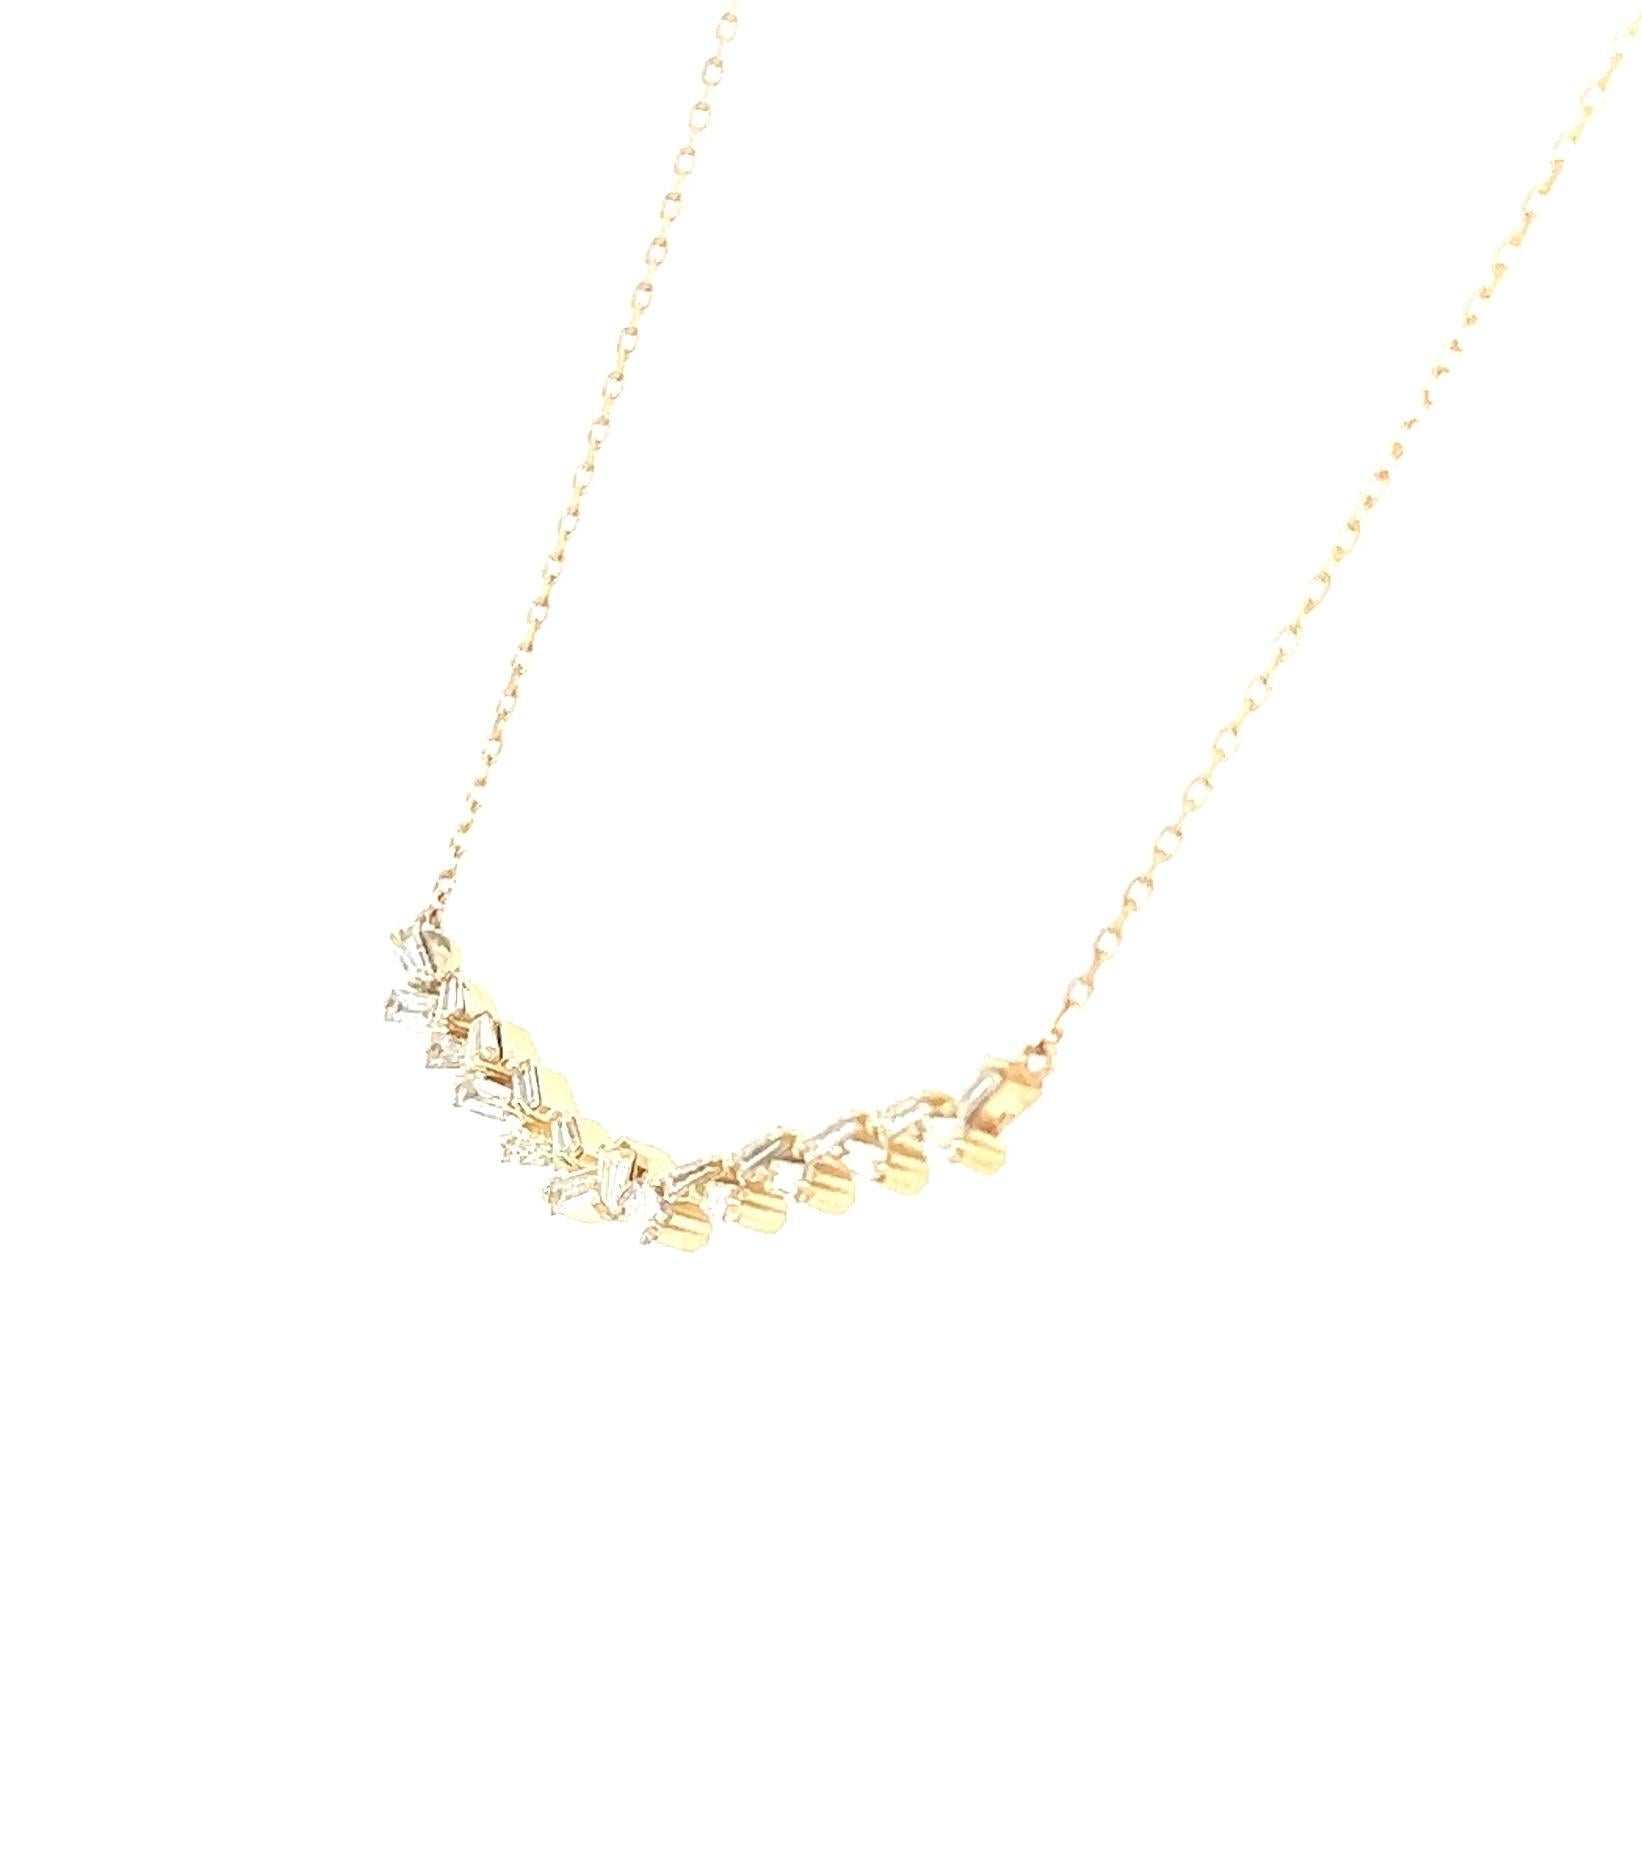 This necklace has a Natural Tapered Baguette Cut Diamonds that weighs 0.66 carats. The clarity and color is: VS-I.

The necklace is 16 inches long and sits well. This necklace is perfect for layering with other necklaces or wearing alone.

Curated